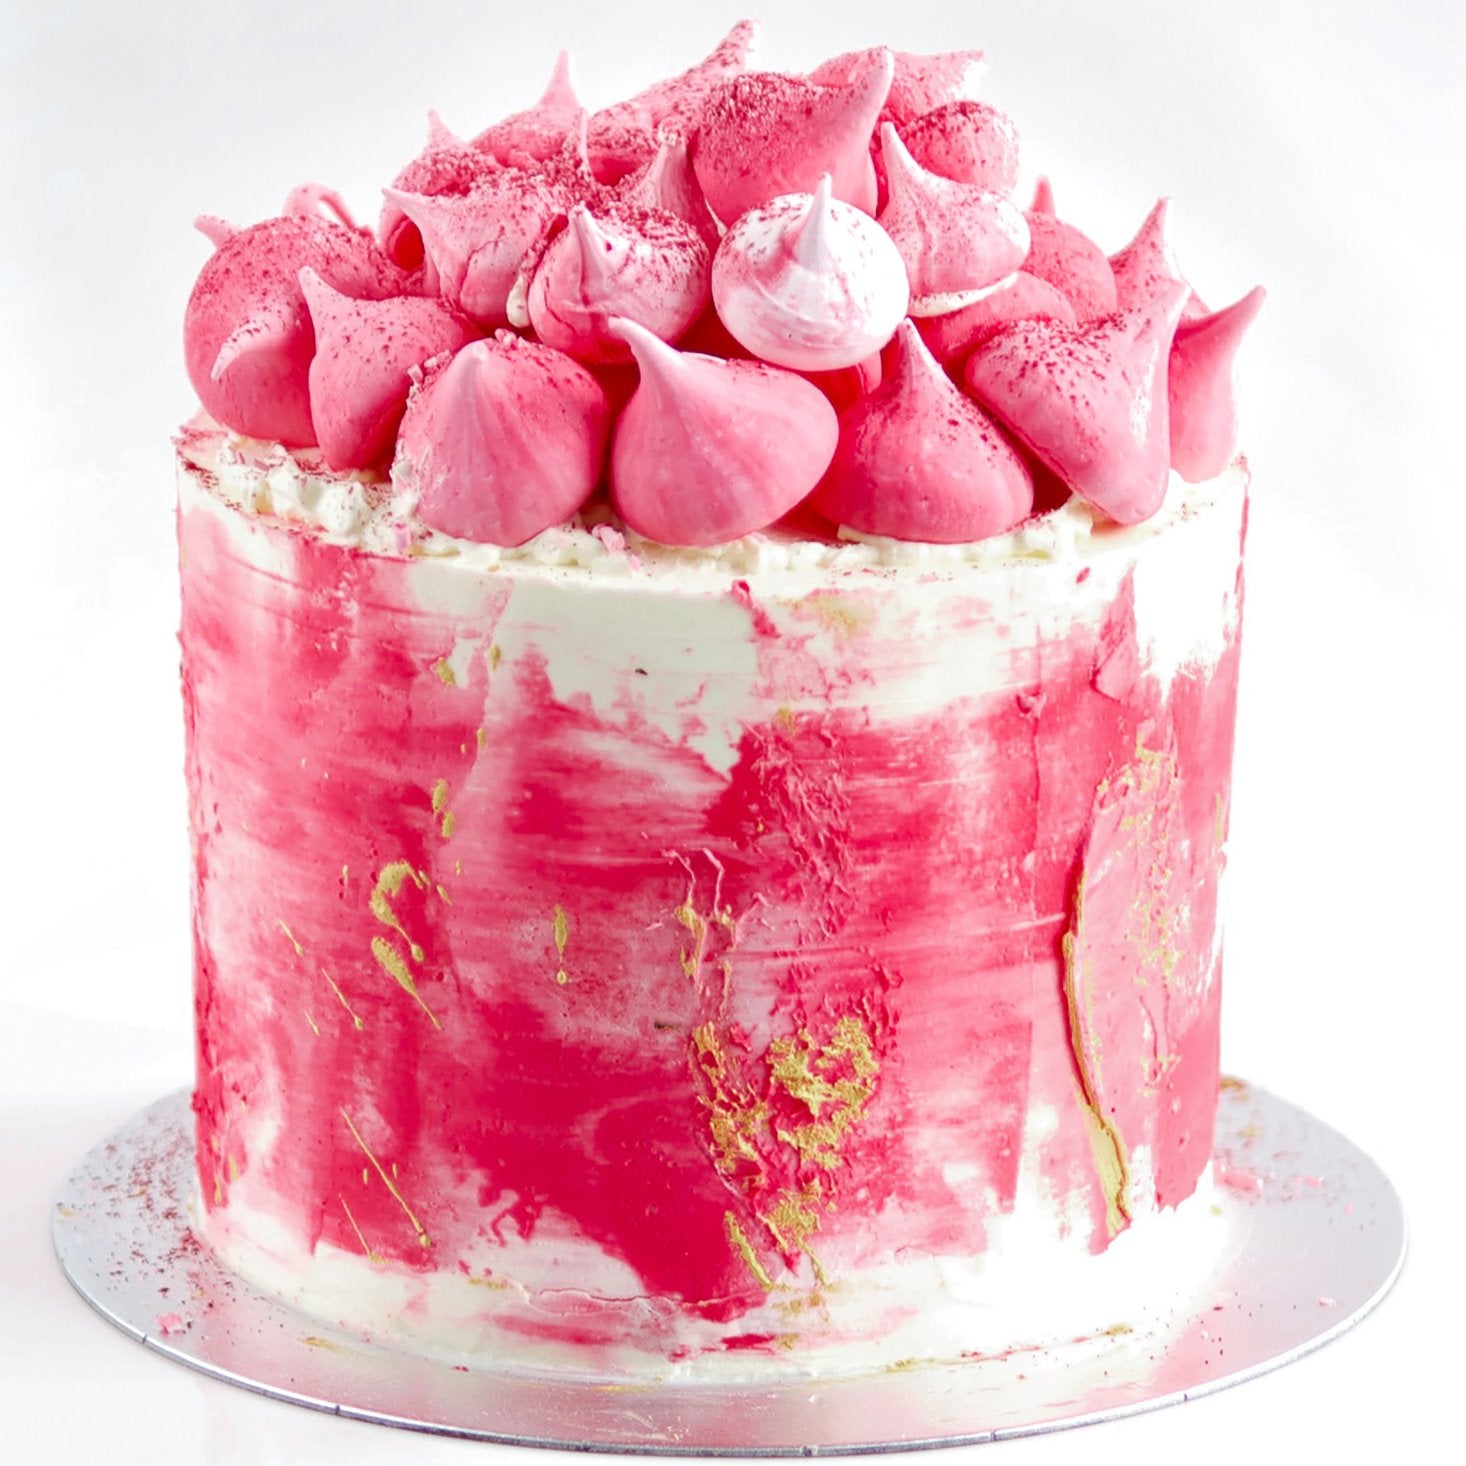 Punk Cake offers celebration cakes in a range of flavours and decoration styles. Our Lemon, Raspberry & Cream Layer Cake, comes with a stunning pink buttercream frosting, topped with meringues. All our cakes are available for delivery across London.  